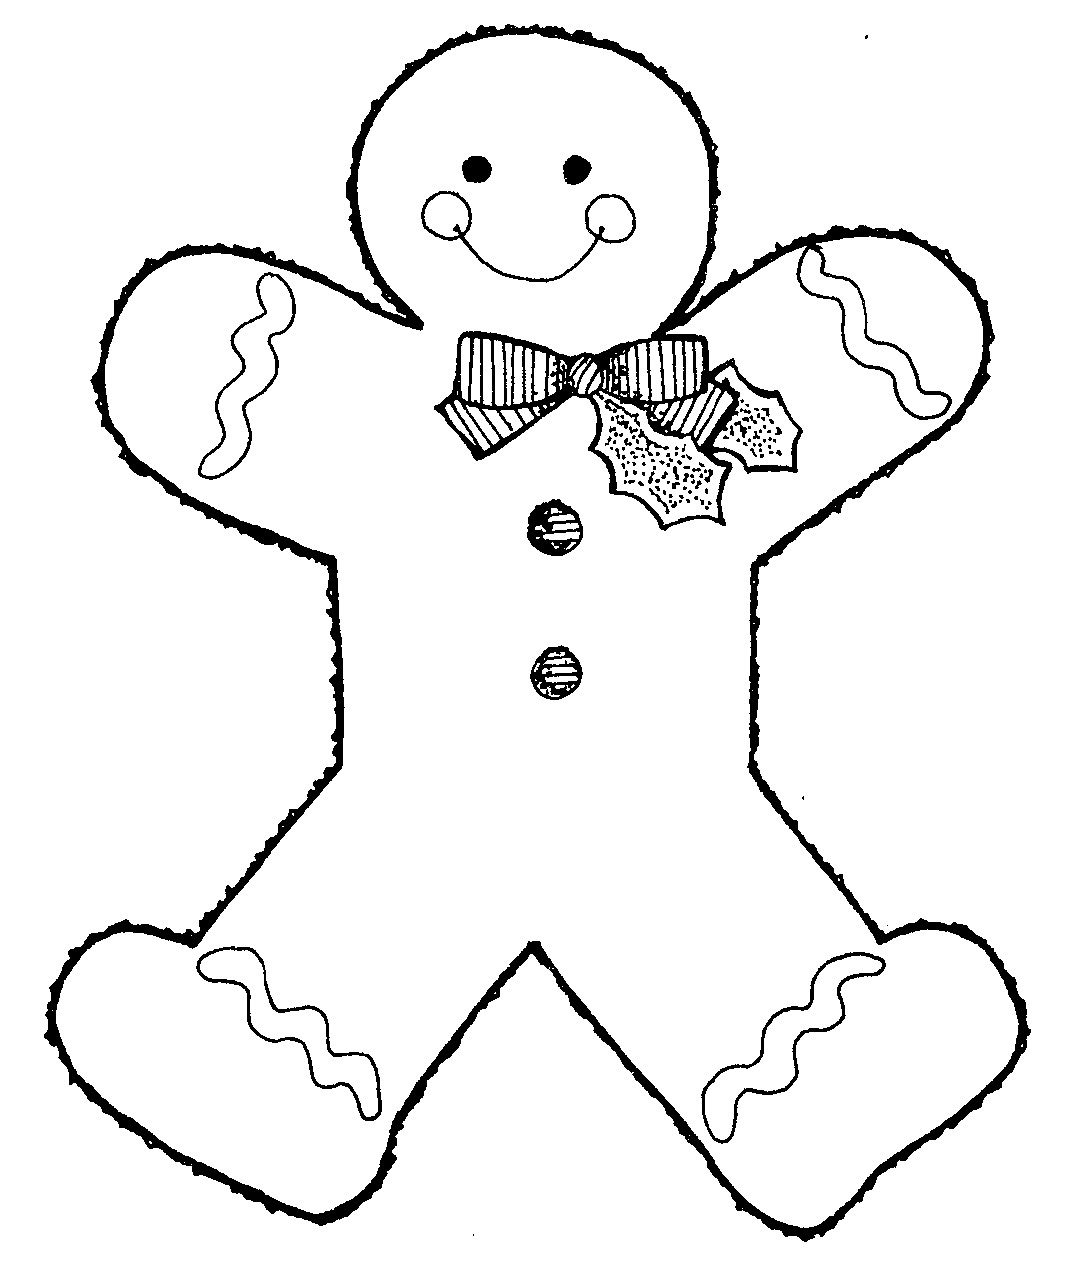 Candy House Coloring Pages For Boys
 Free Printable Gingerbread Man Coloring Pages For Kids